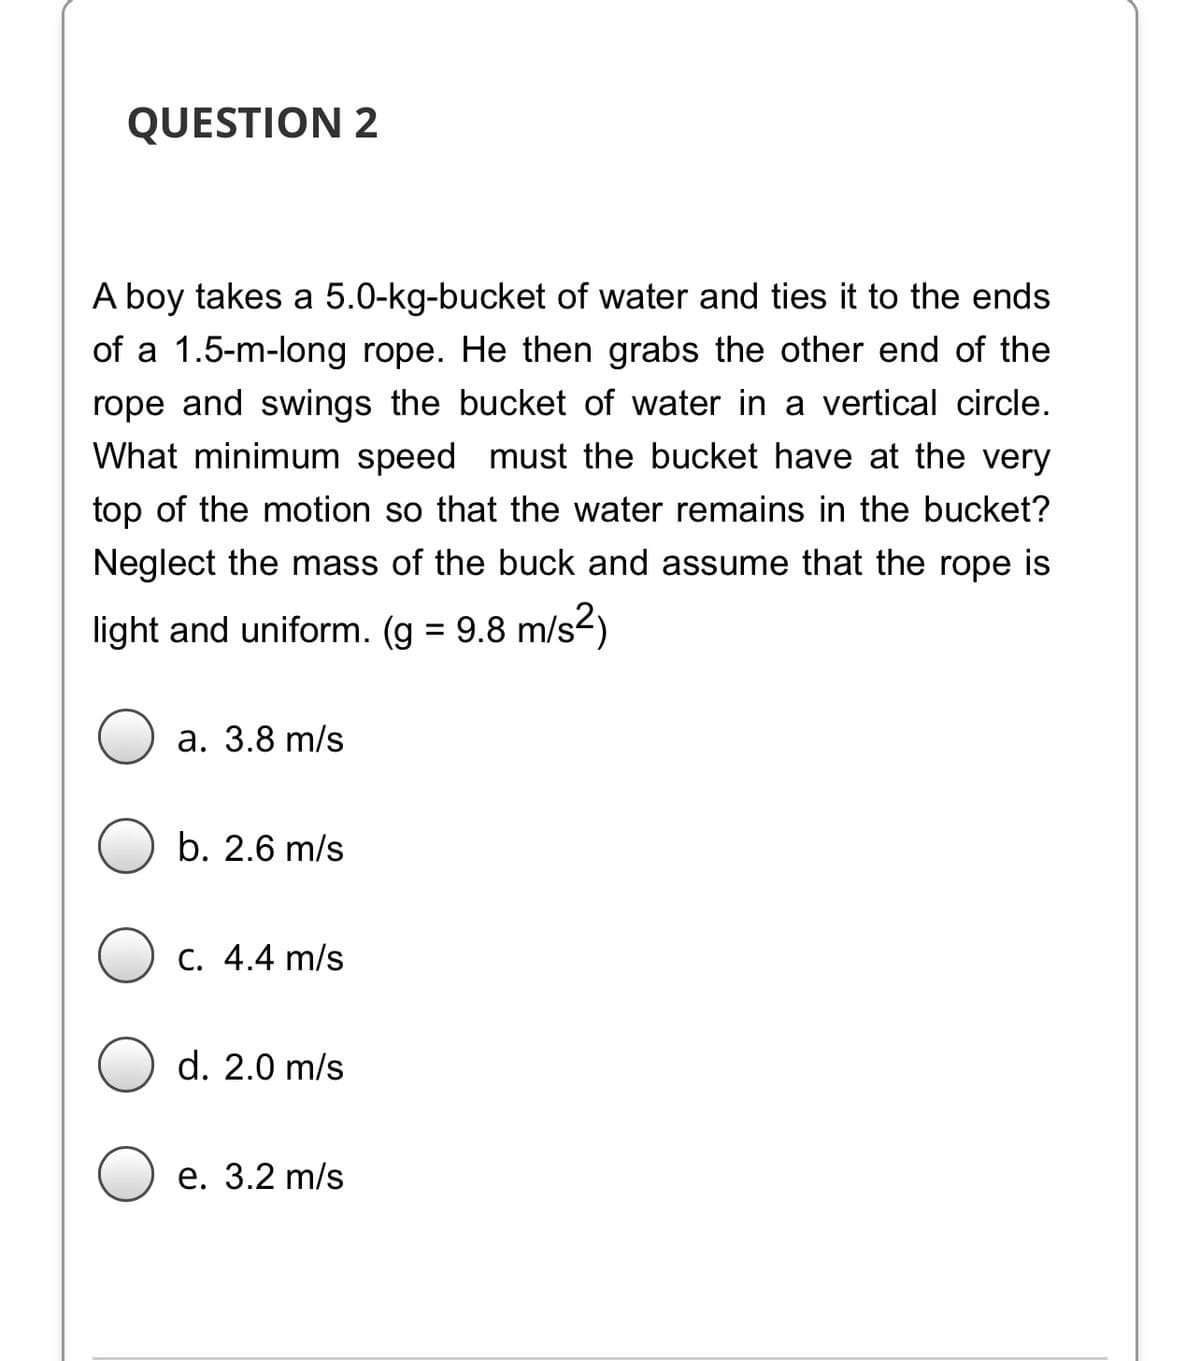 QUESTION 2
A boy takes a 5.0-kg-bucket of water and ties it to the ends
of a 1.5-m-long rope. He then grabs the other end of the
rope and swings the bucket of water in a vertical circle.
What minimum speed must the bucket have at the very
top of the motion so that the water remains in the bucket?
Neglect the mass of the buck and assume that the rope is
light and uniform. (g = 9.8 m/s2)
а. 3.8 m/s
b. 2.6 m/s
C. 4.4 m/s
d. 2.0 m/s
е. 3.2 m/s
